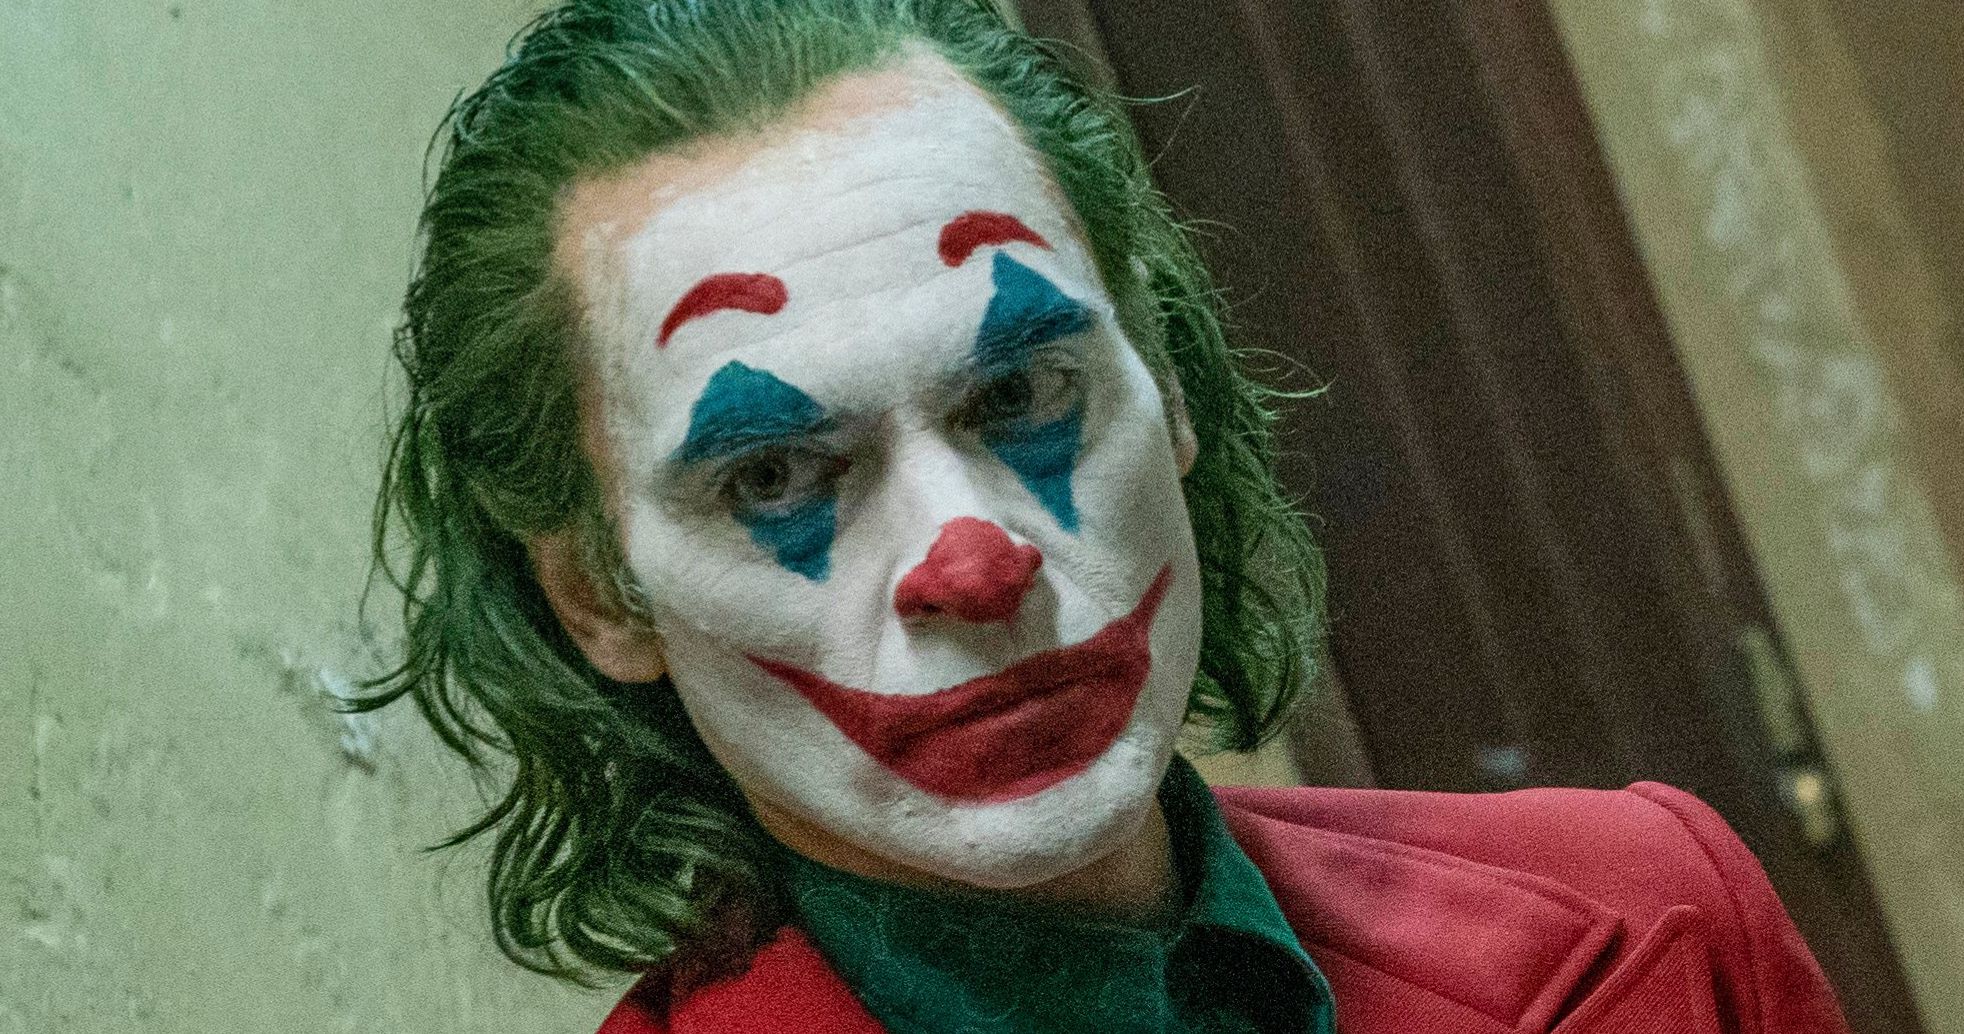 Warner Bros. Responds to Joker Controversy, Insists It Doesn't Advocate Violence